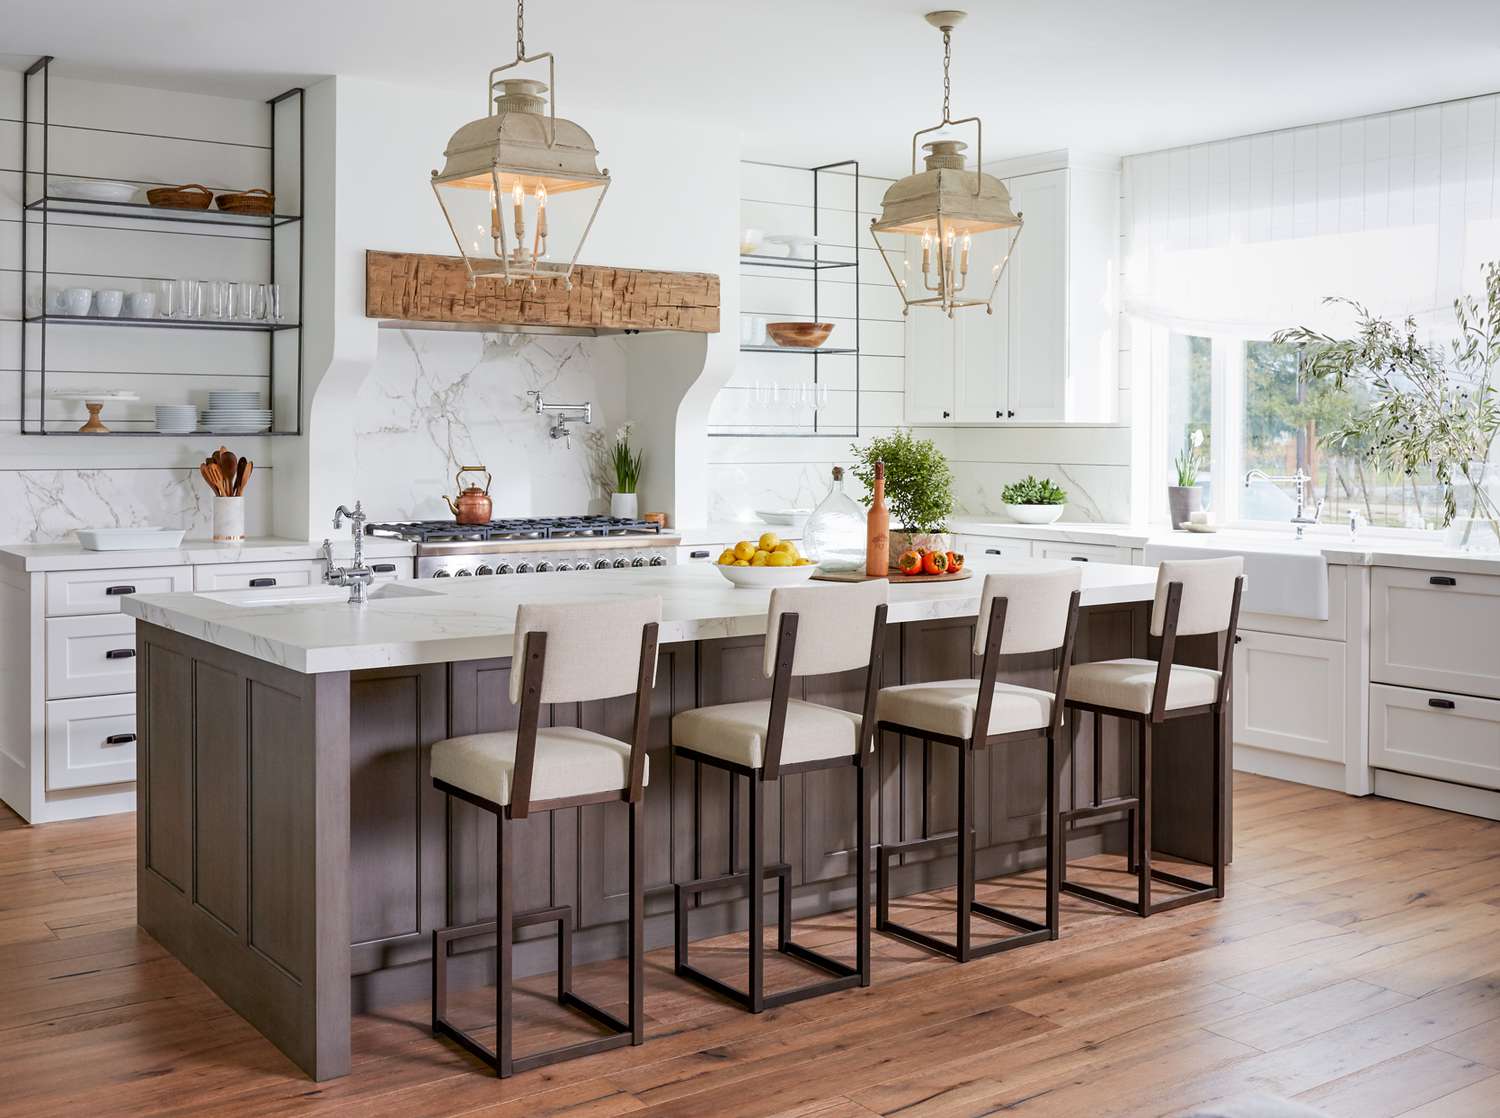 Kitchen Islands With Seating / Rethink Your Kitchen Island With ...